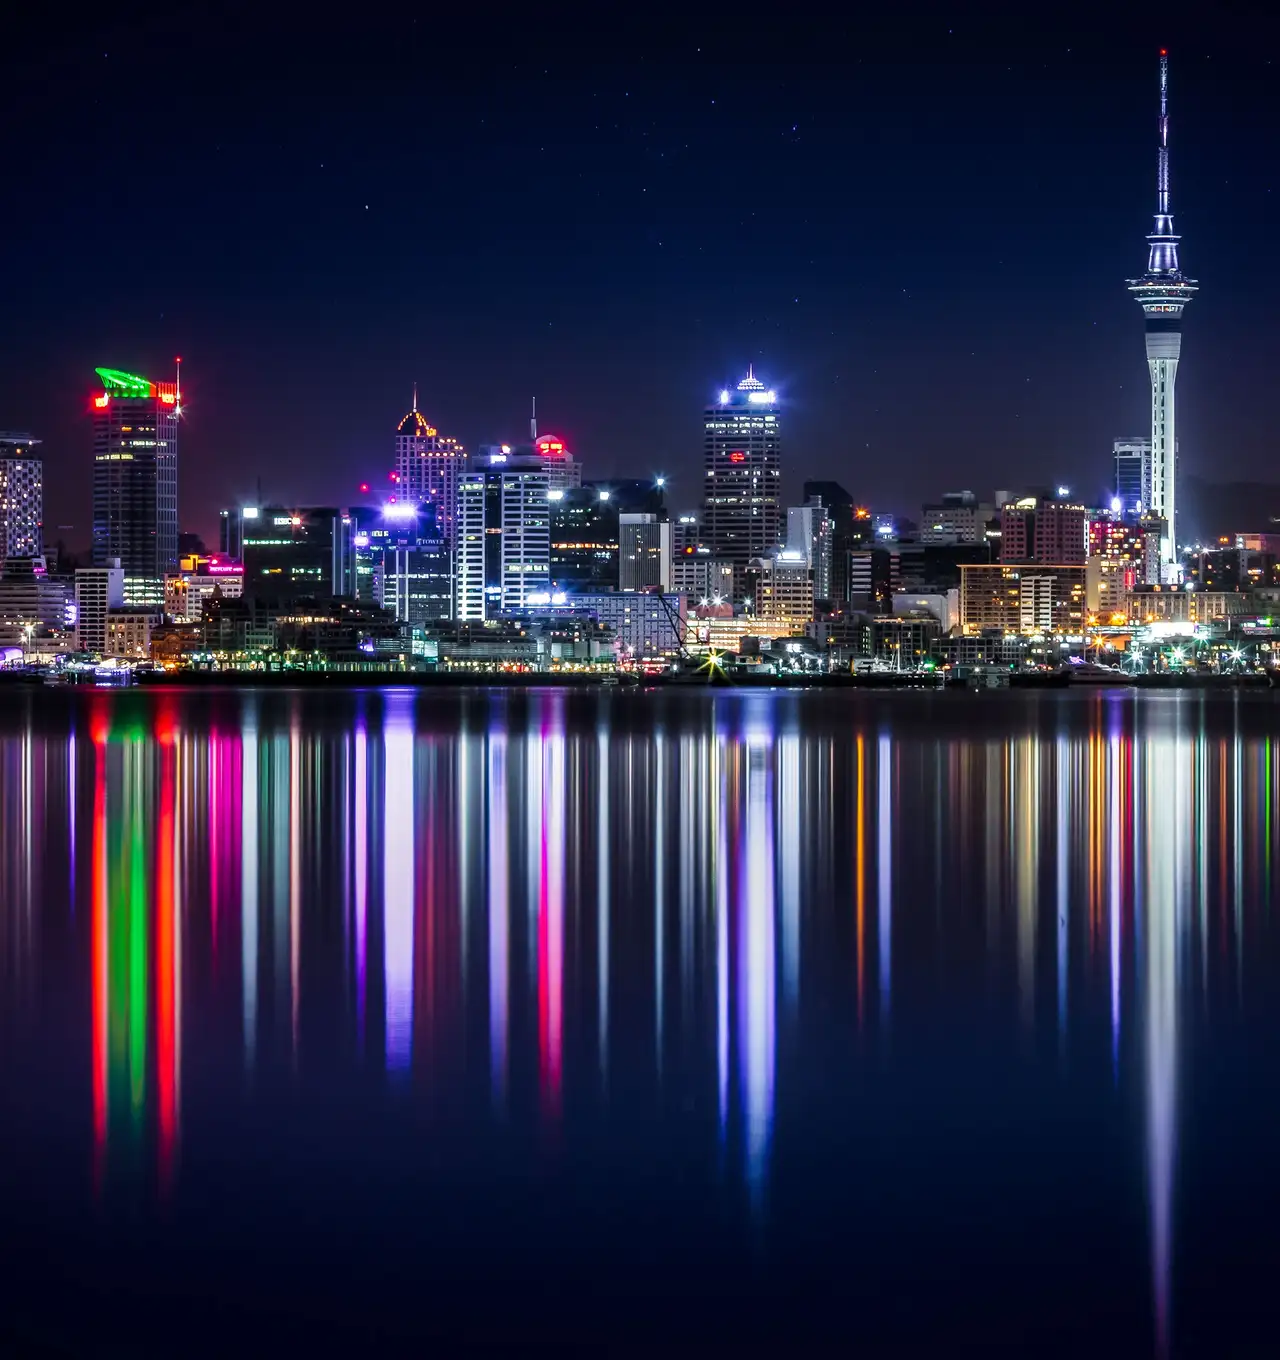 The Auckland skyline at night